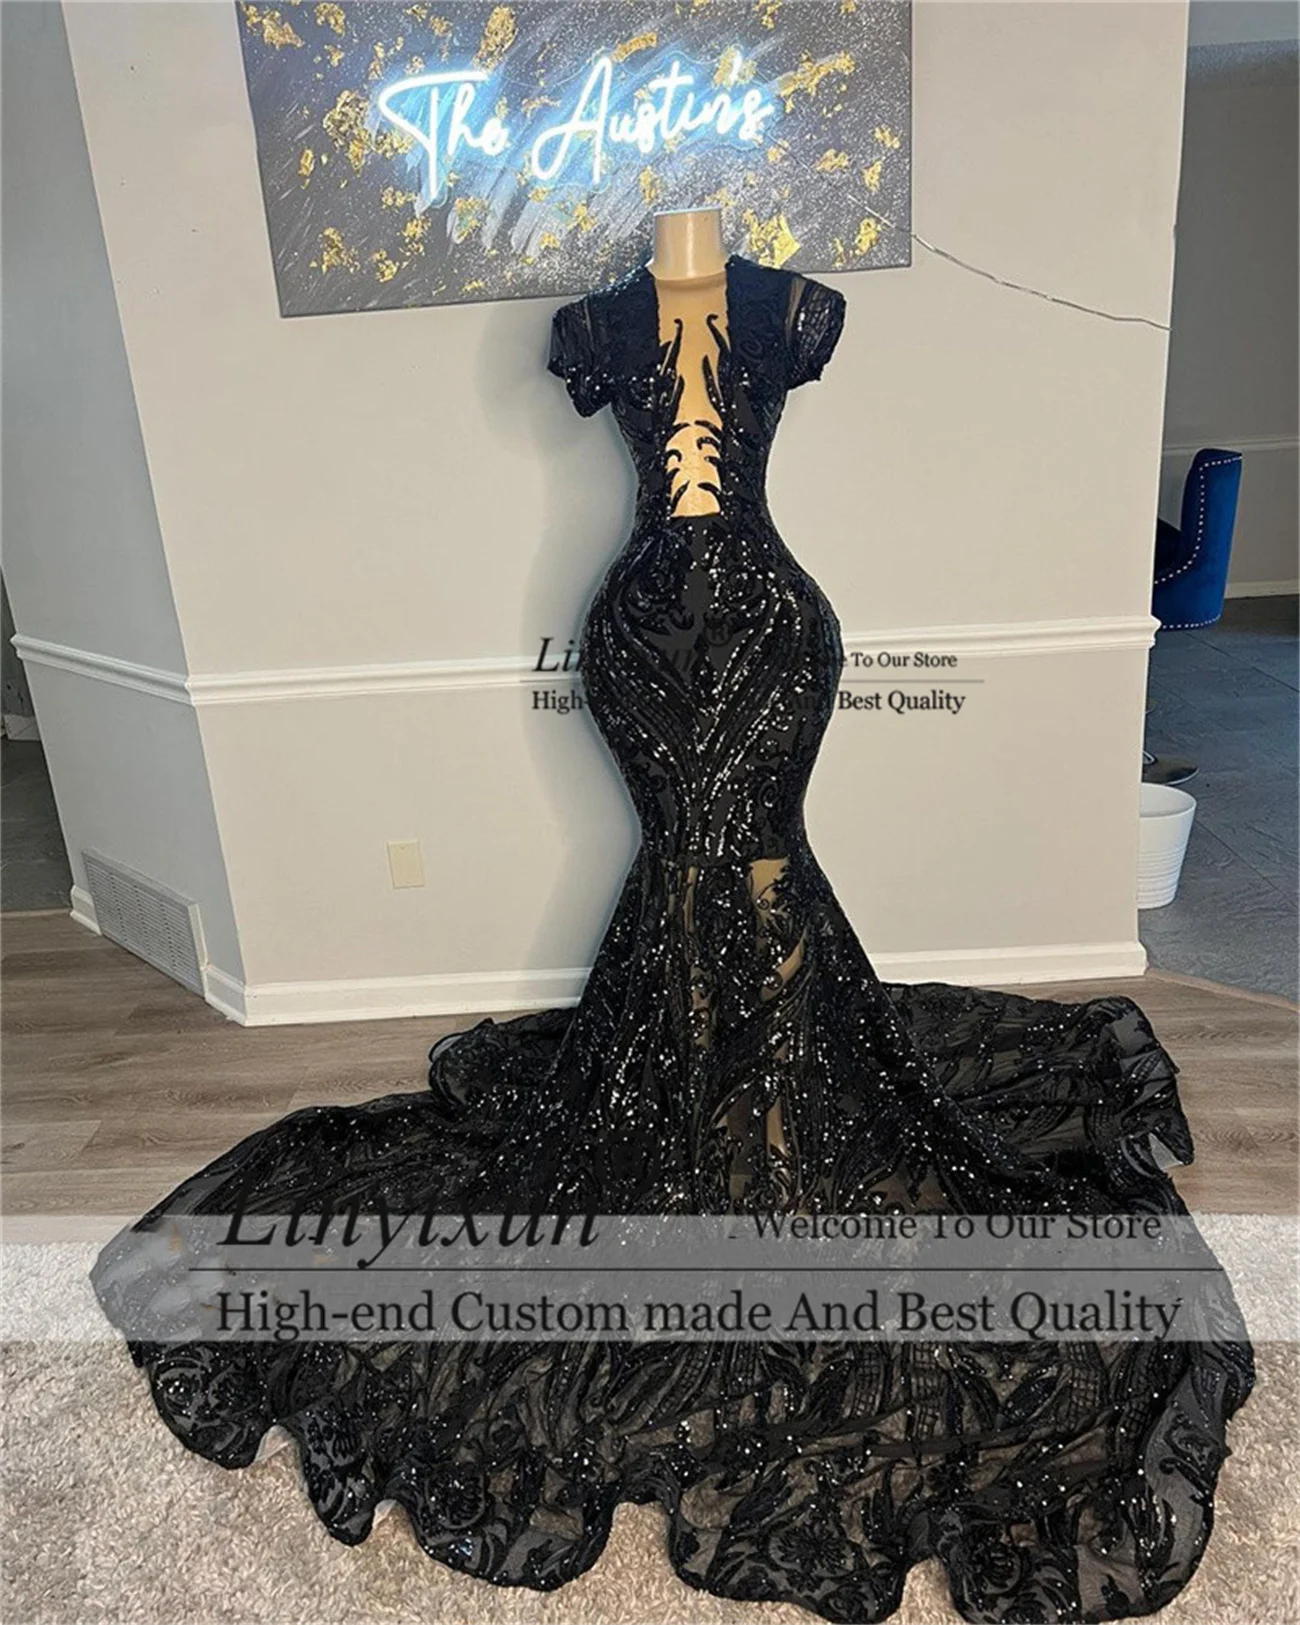 

Sparkly Black Sequins Lace Mermaid Prom Dresses Sheer Neck Ruffle Formal Evening Party Gowns Long Court Train Robe De Soiree